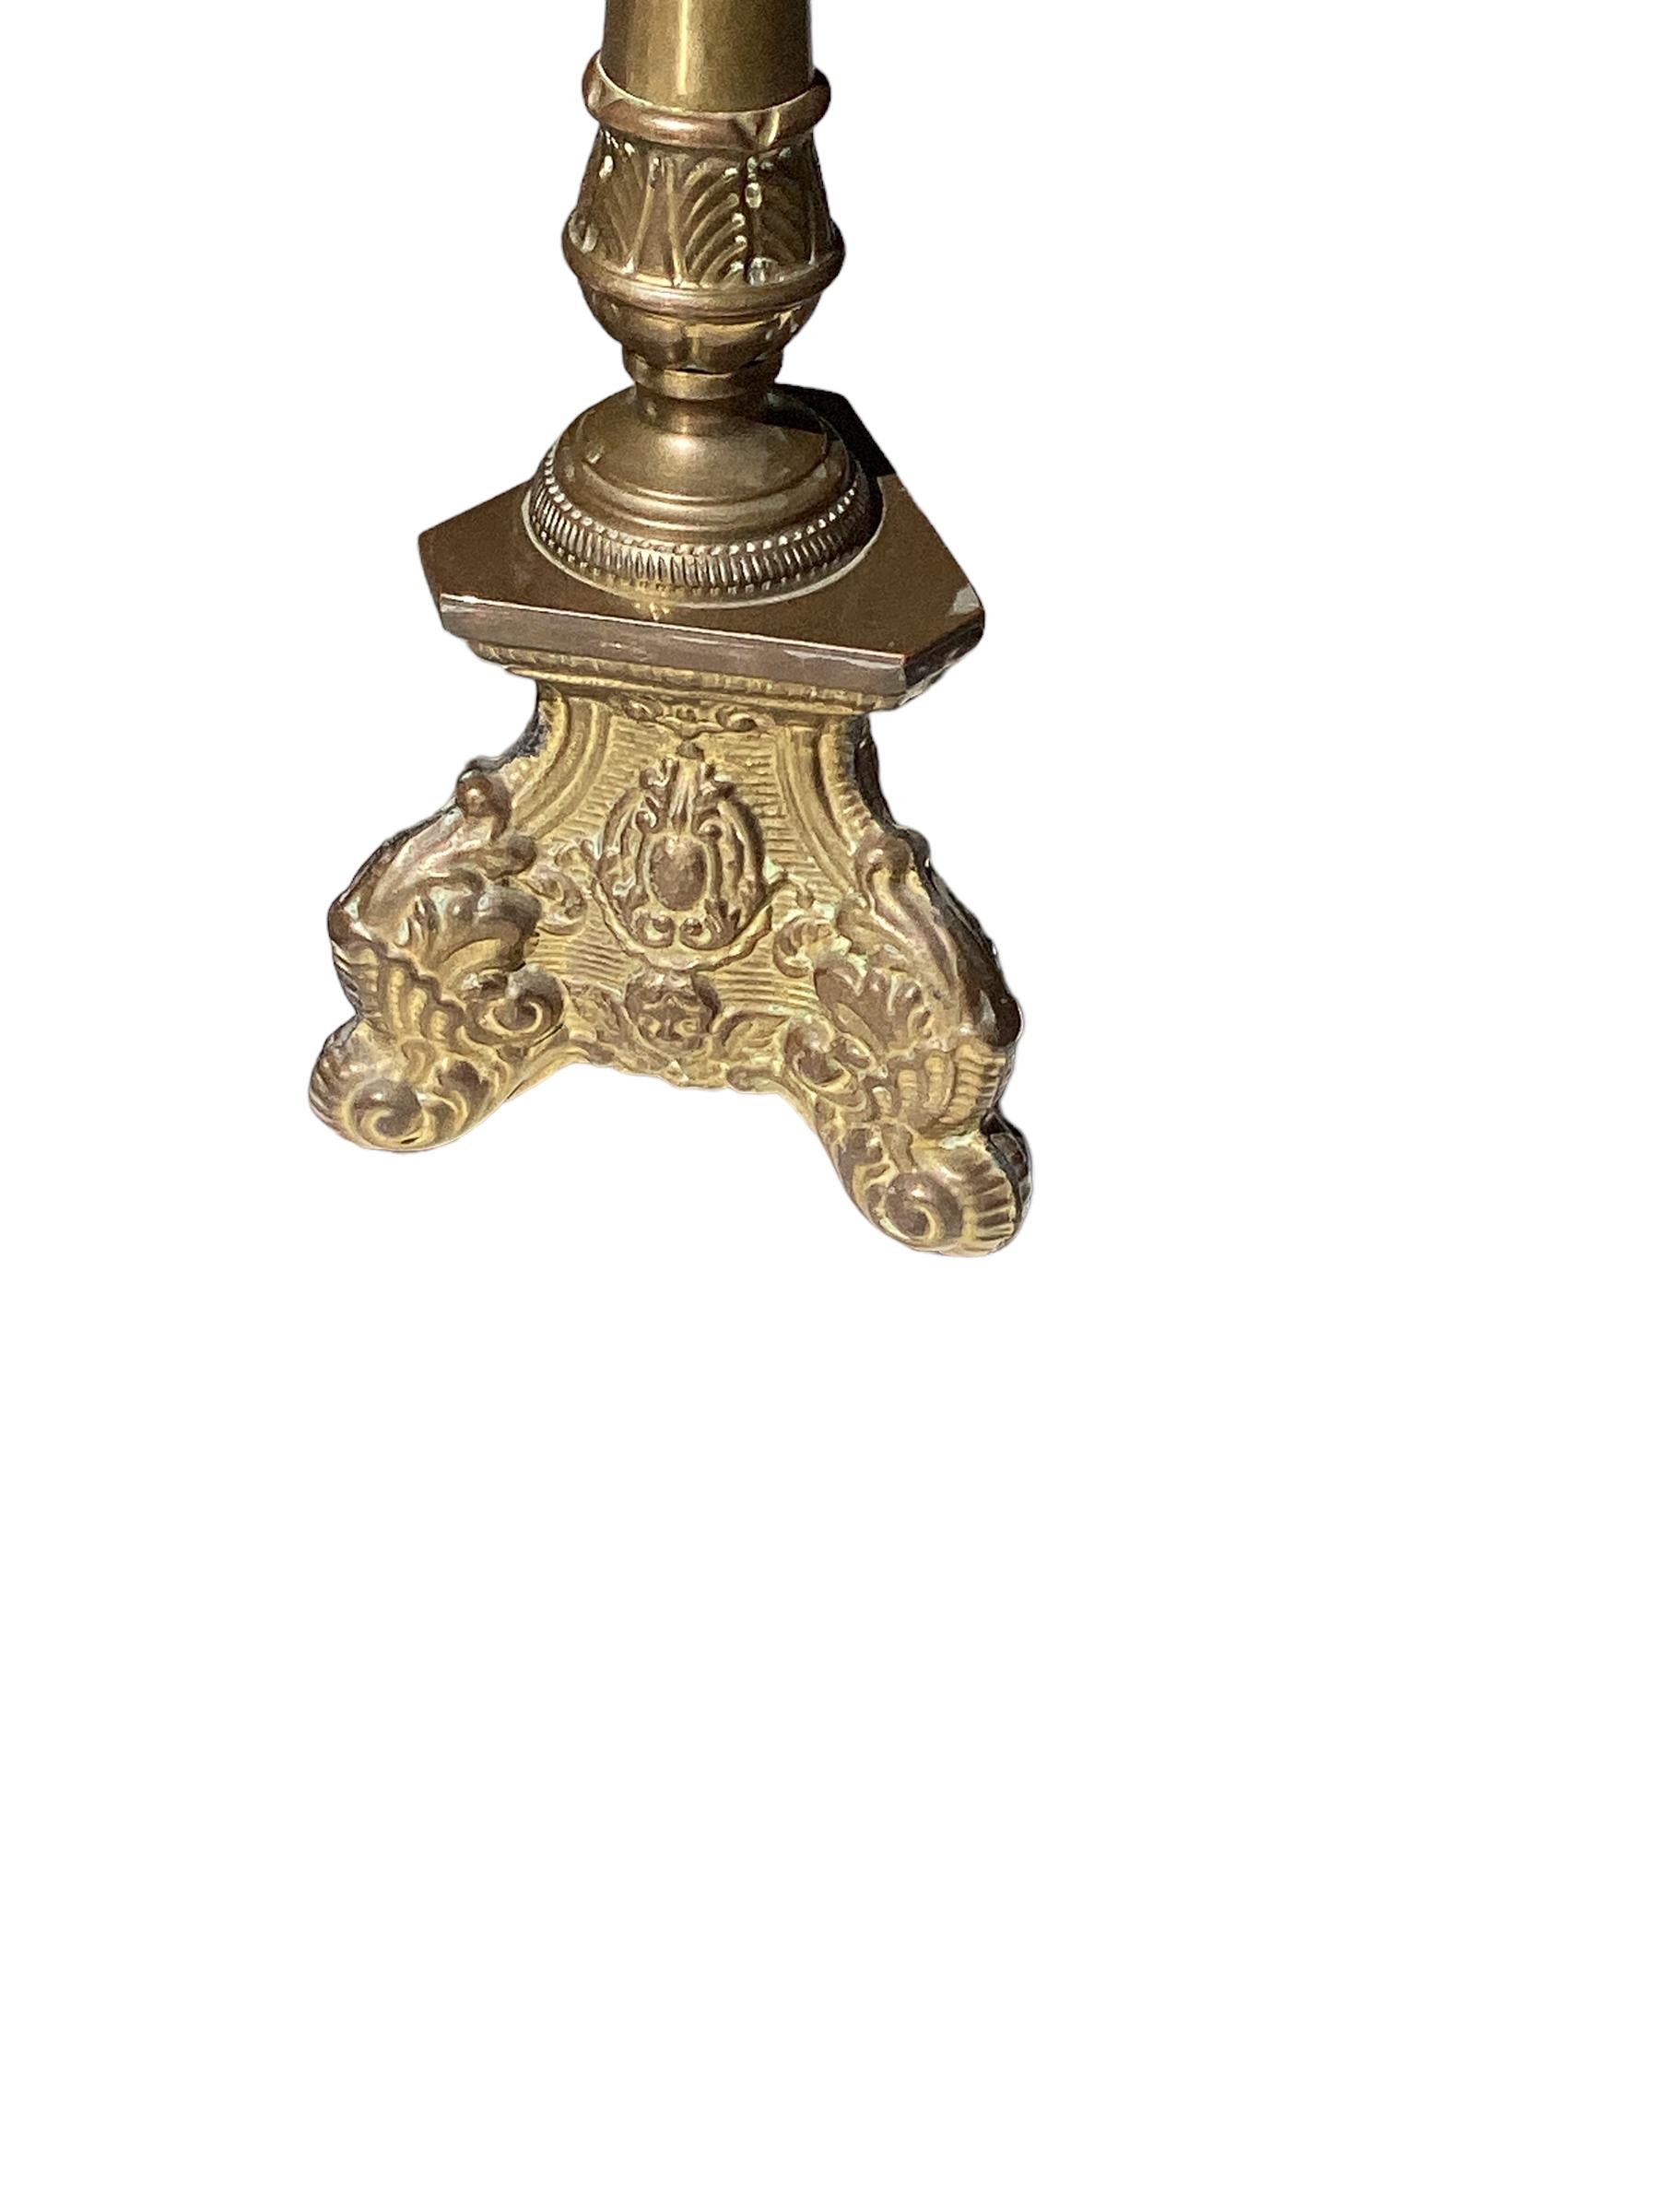 Pair of antique solid brass candlesticks with later conversion to electricity. Each candlesticks sits on a triangular base with repoussé relief decoration. Lamps are newly wired and in good working condition.